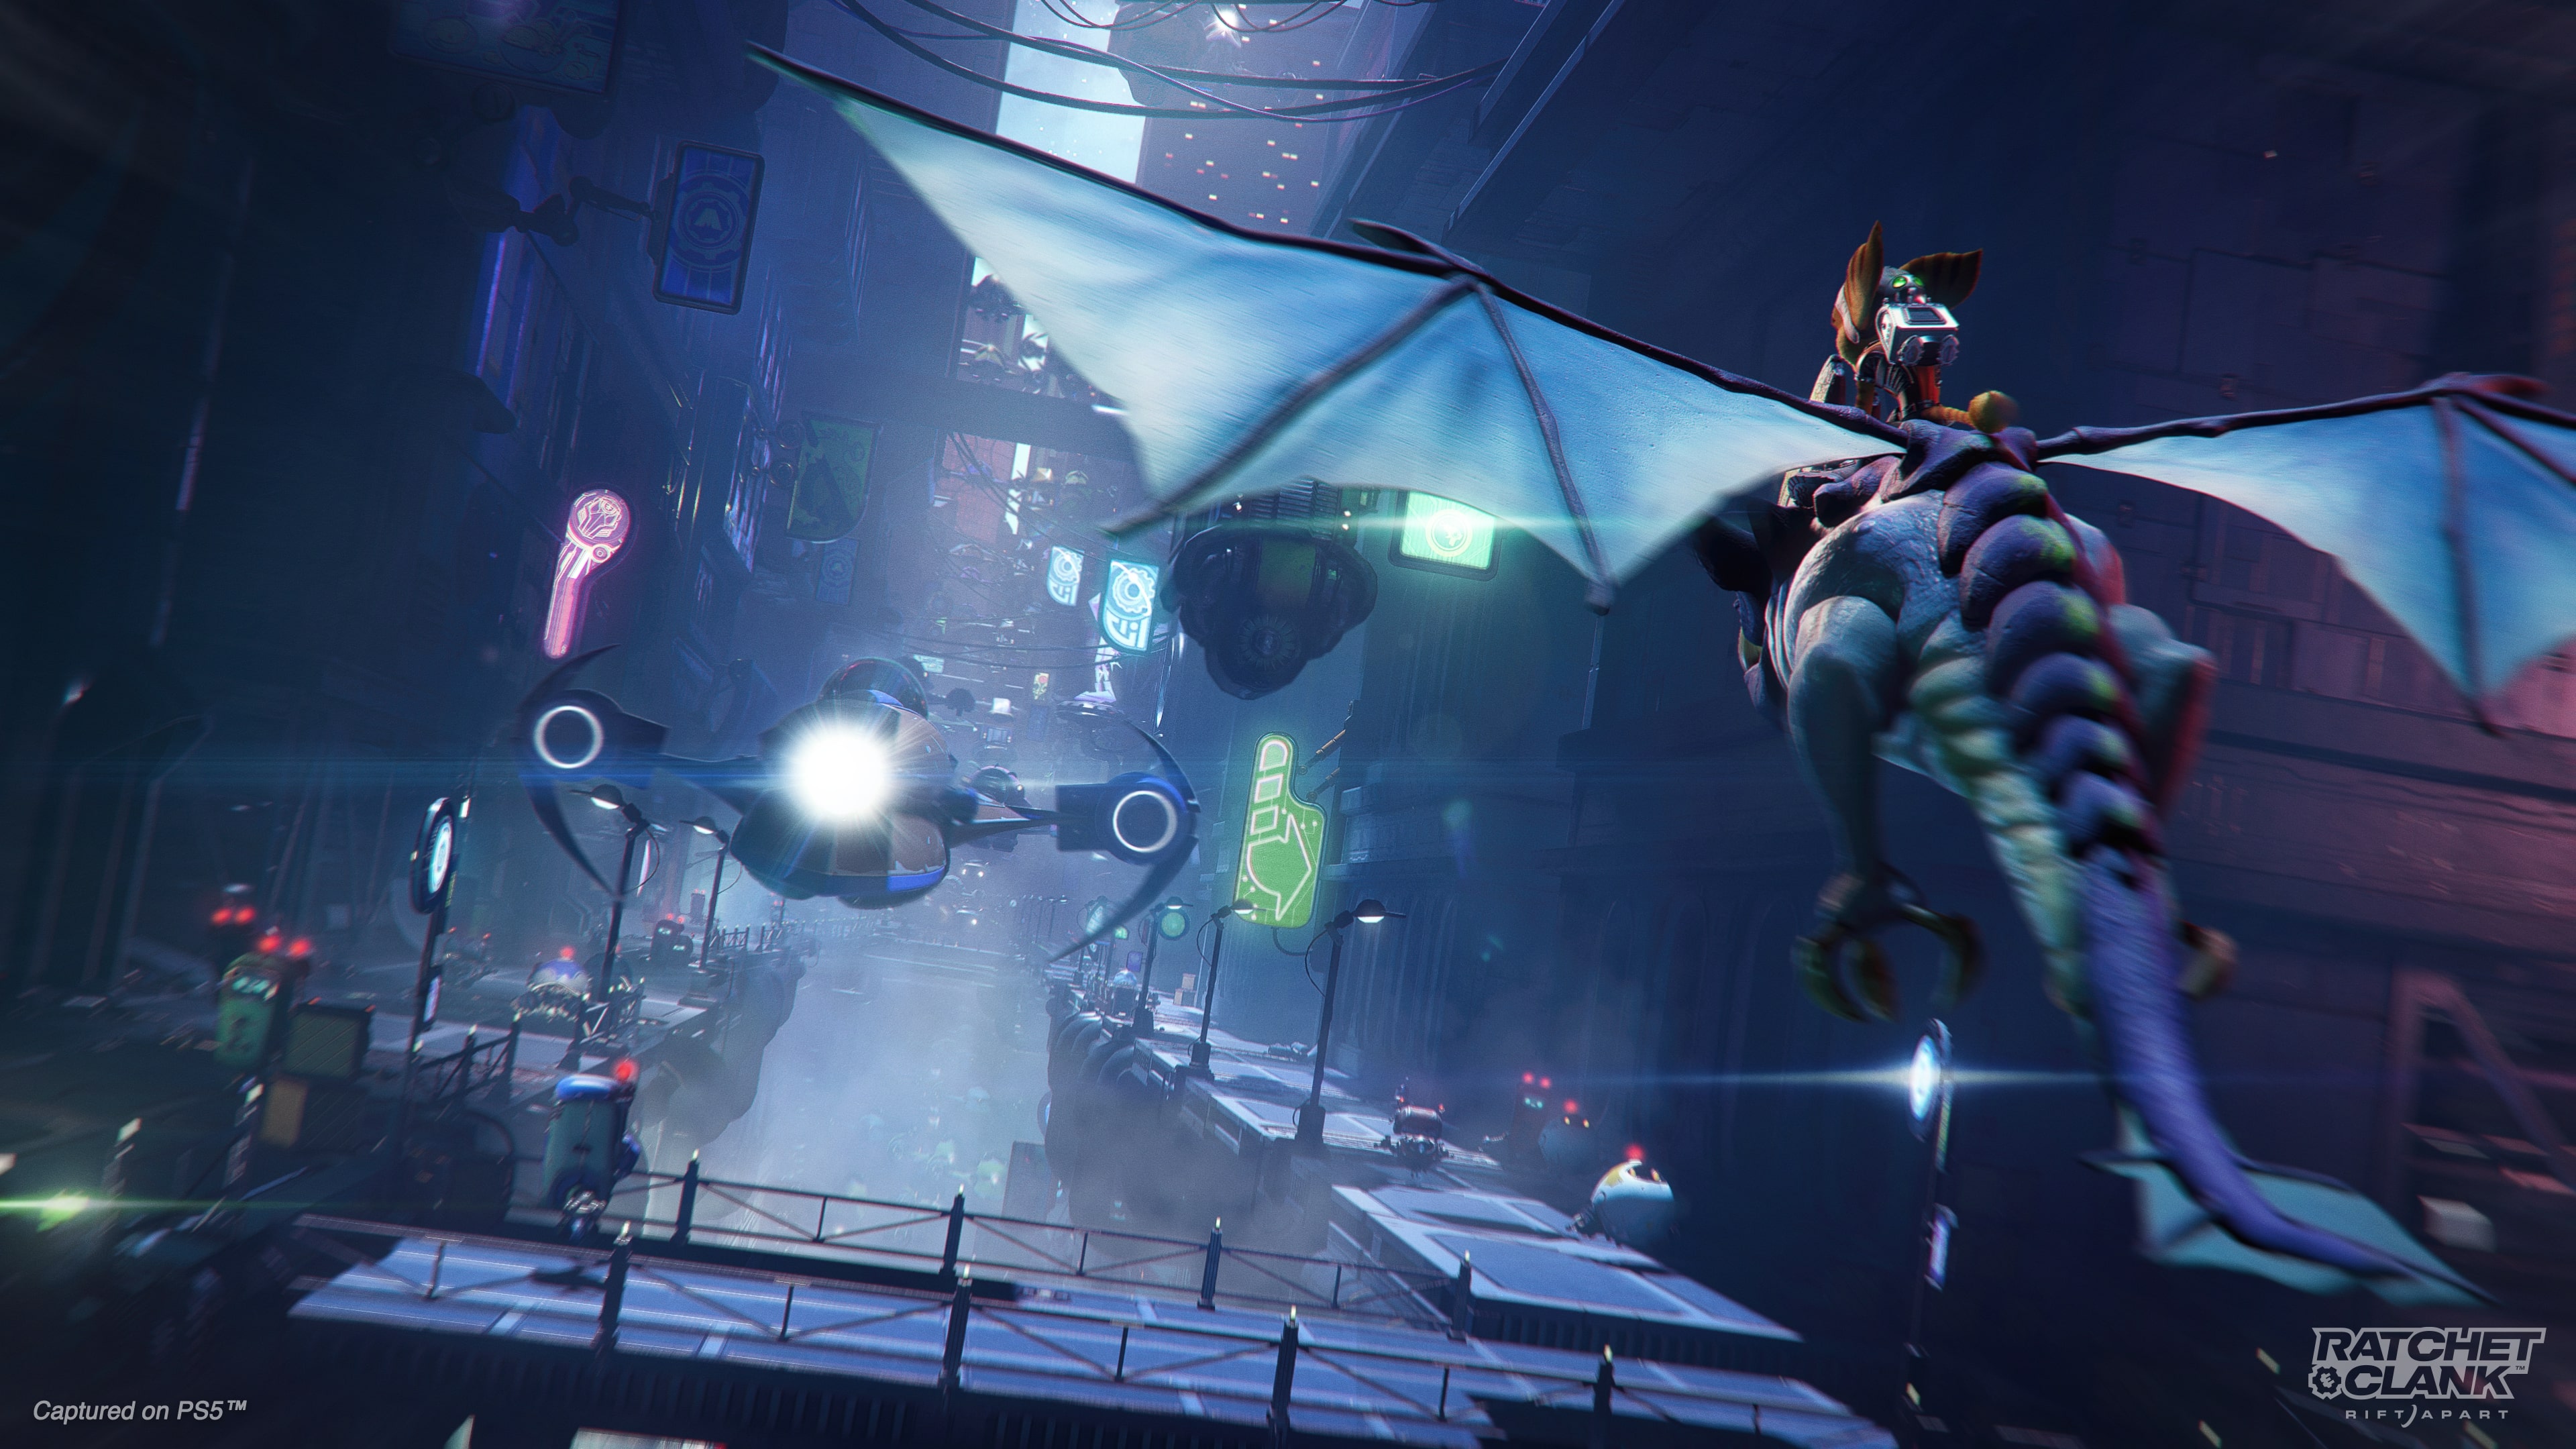 Modernizing PS5 hit Ratchet & Clank meant making it easier